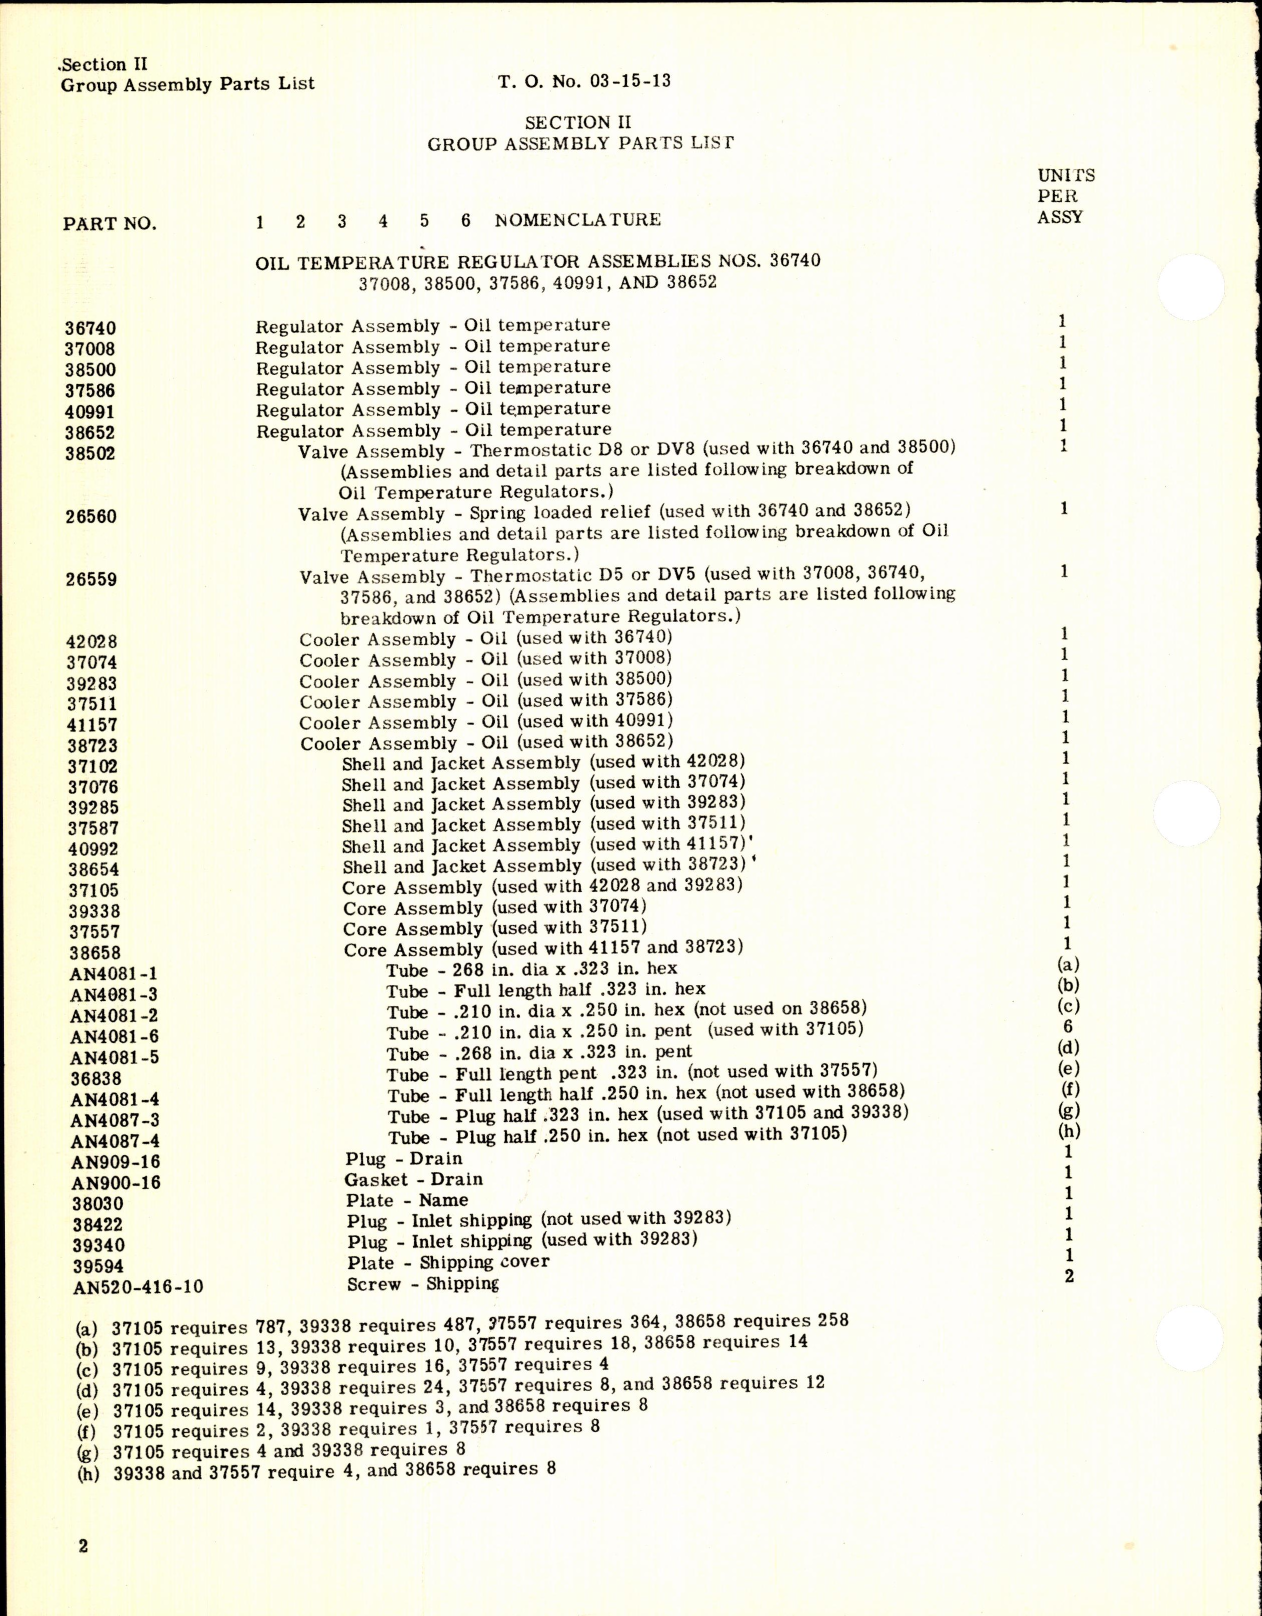 Sample page 4 from AirCorps Library document: Parts Catalog for Oil Coolers and Control Valves